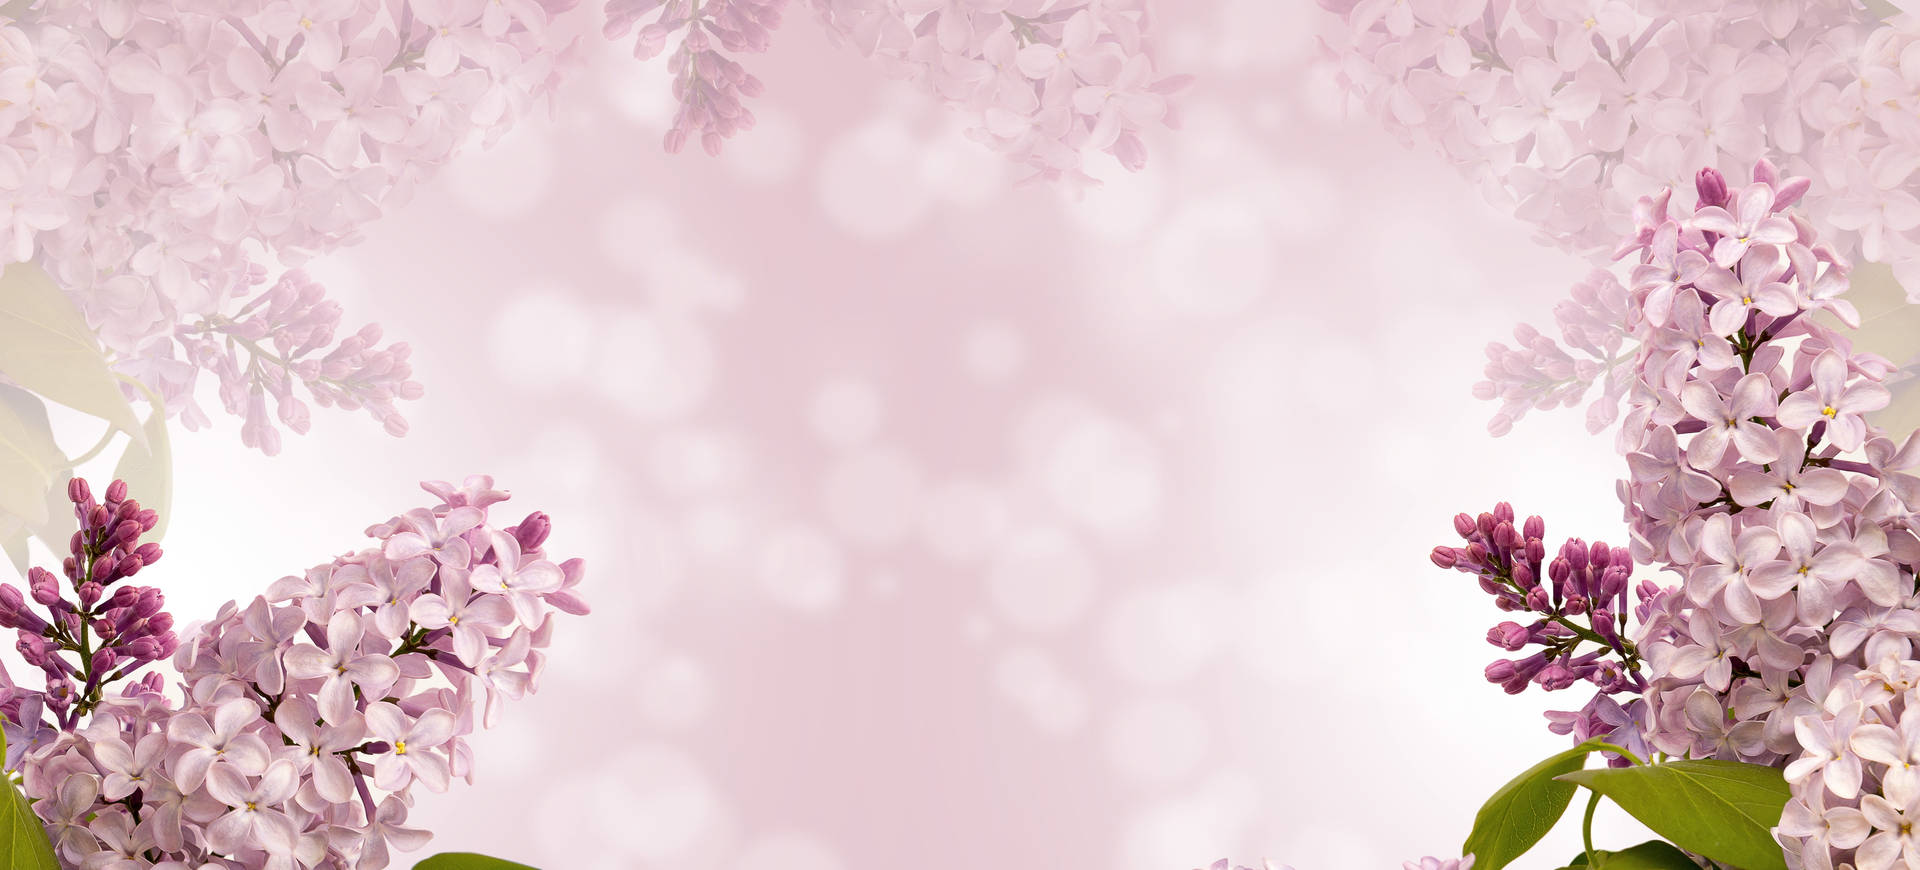 Background Design With Pink Flowers Background